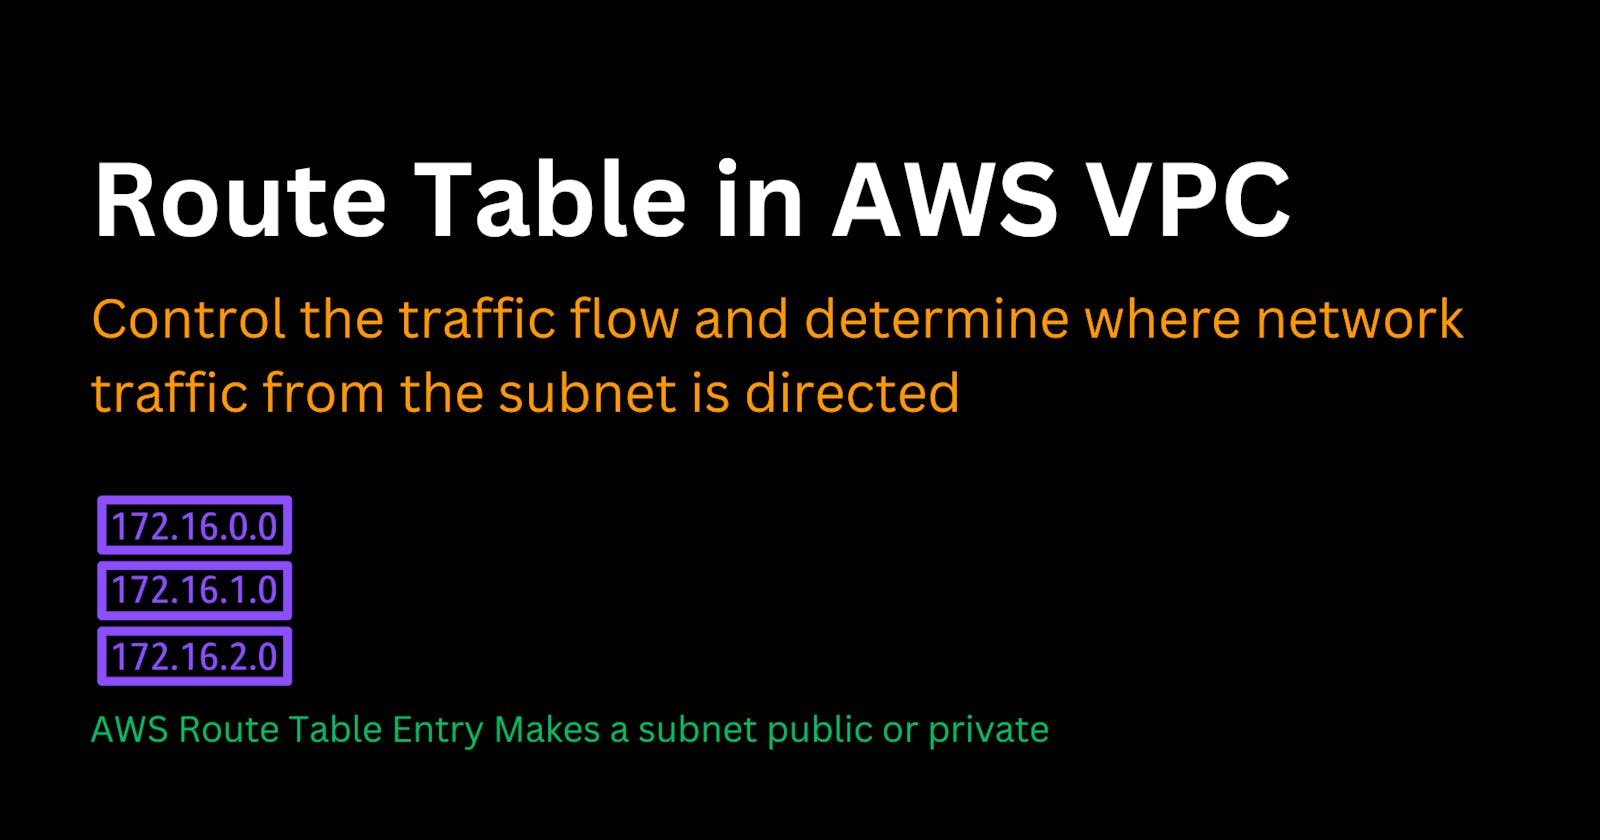 AWS VPC Route Table